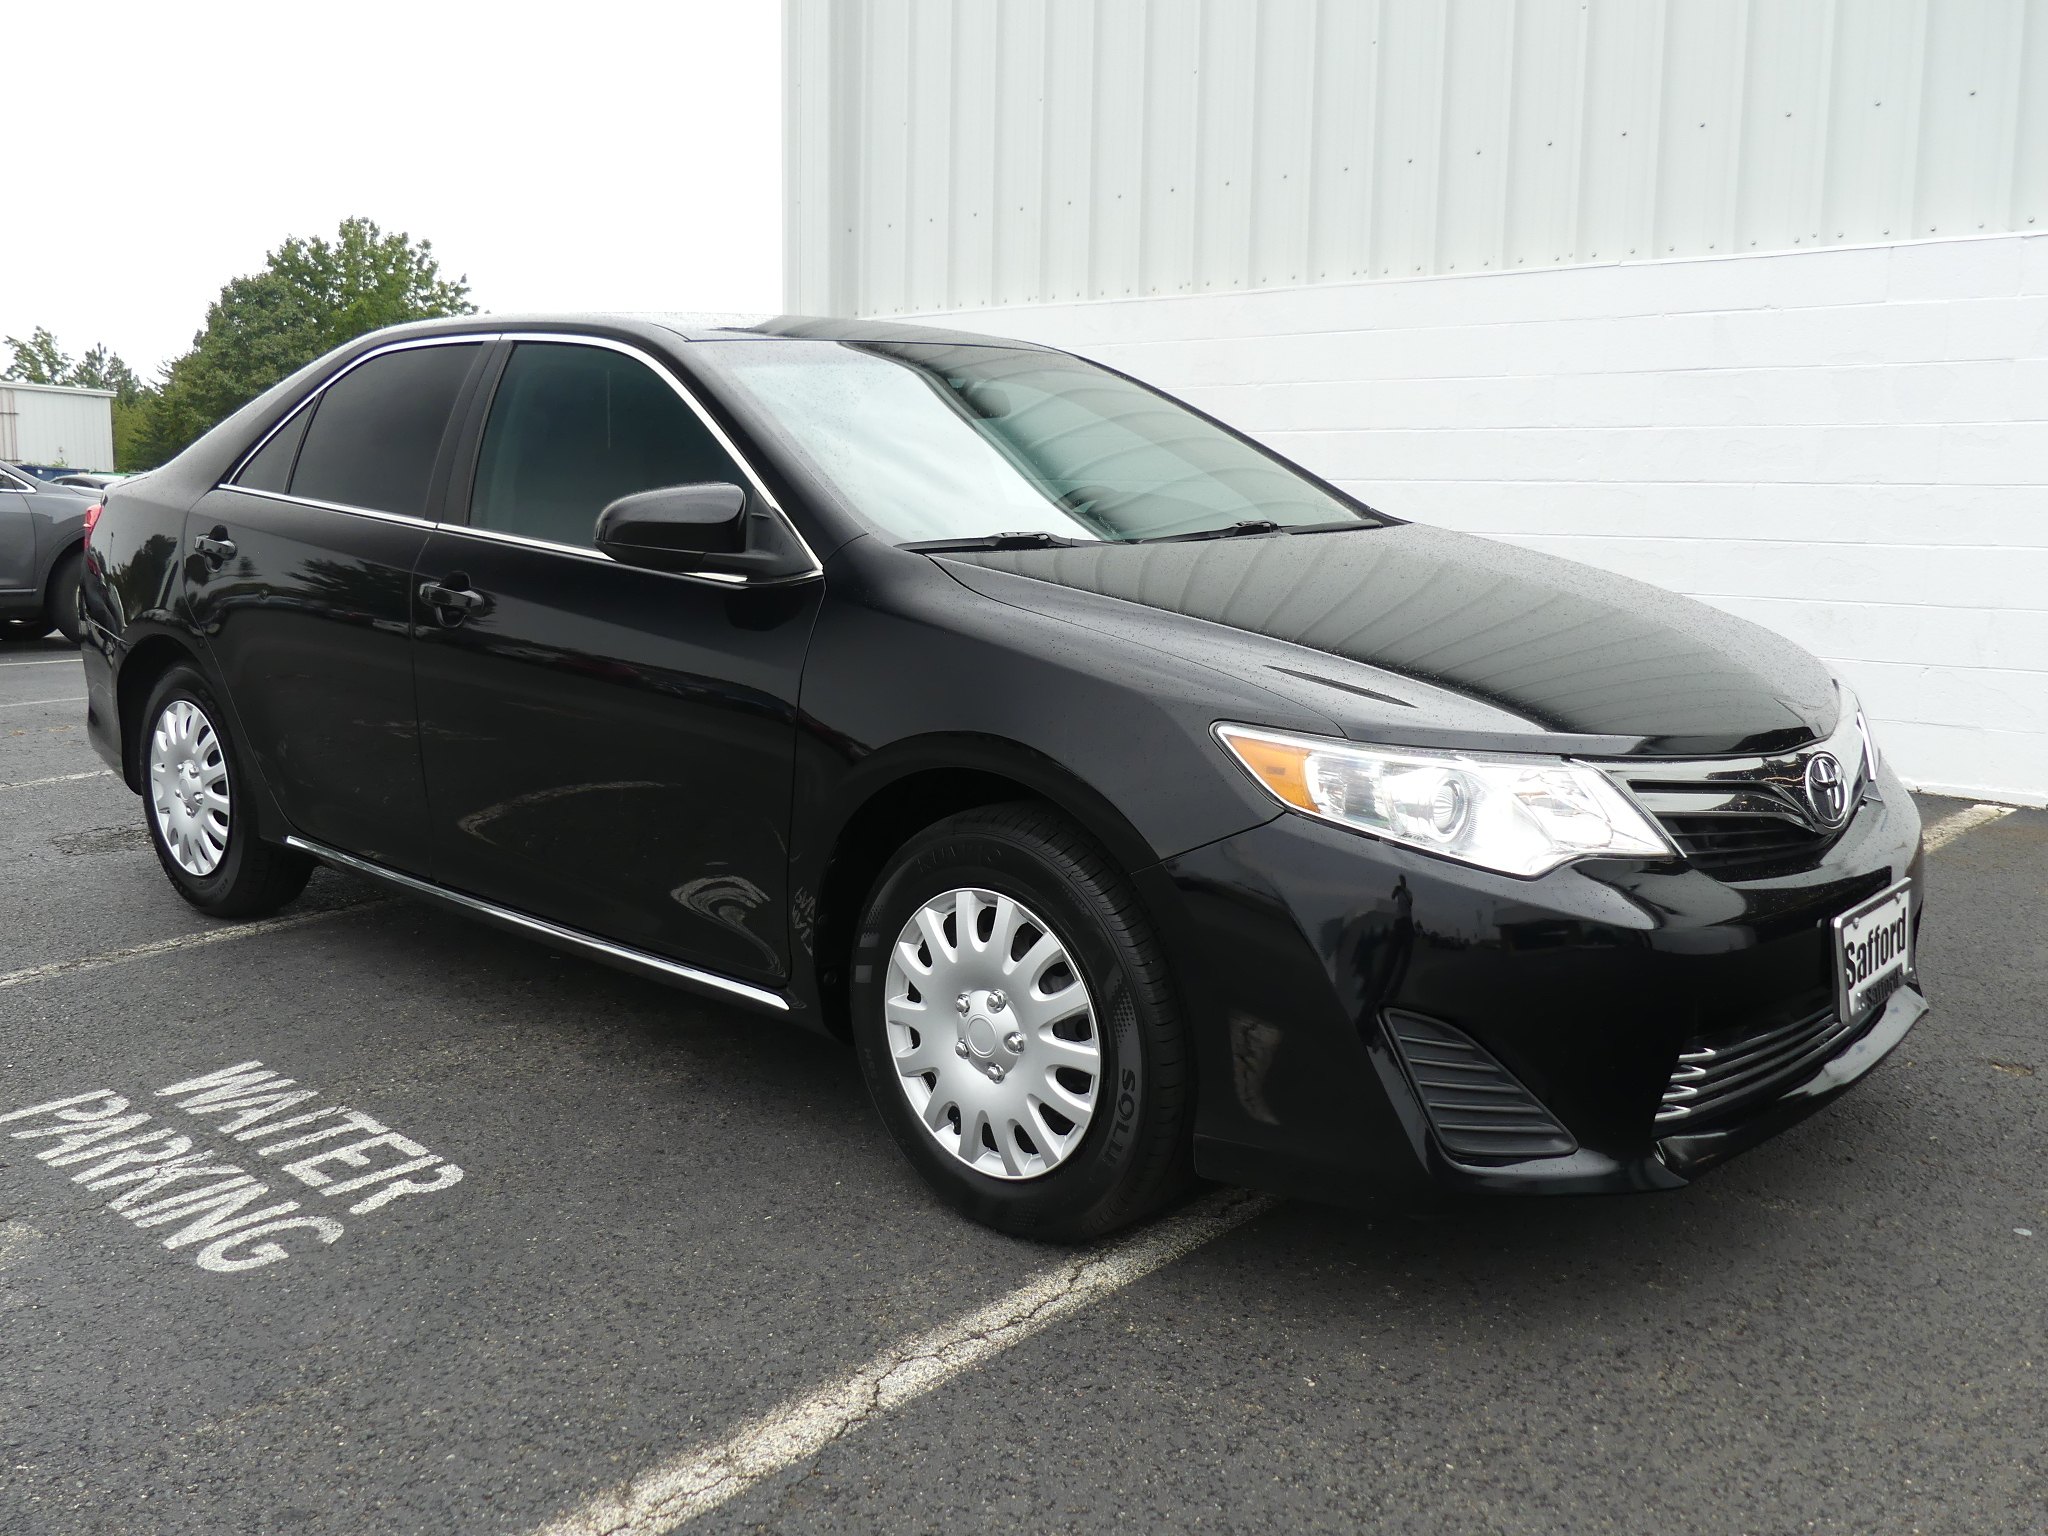 Pre-Owned 2014 Toyota Camry 4dr Sdn I4 Auto LE (Natl) *Ltd Avail* in ...
